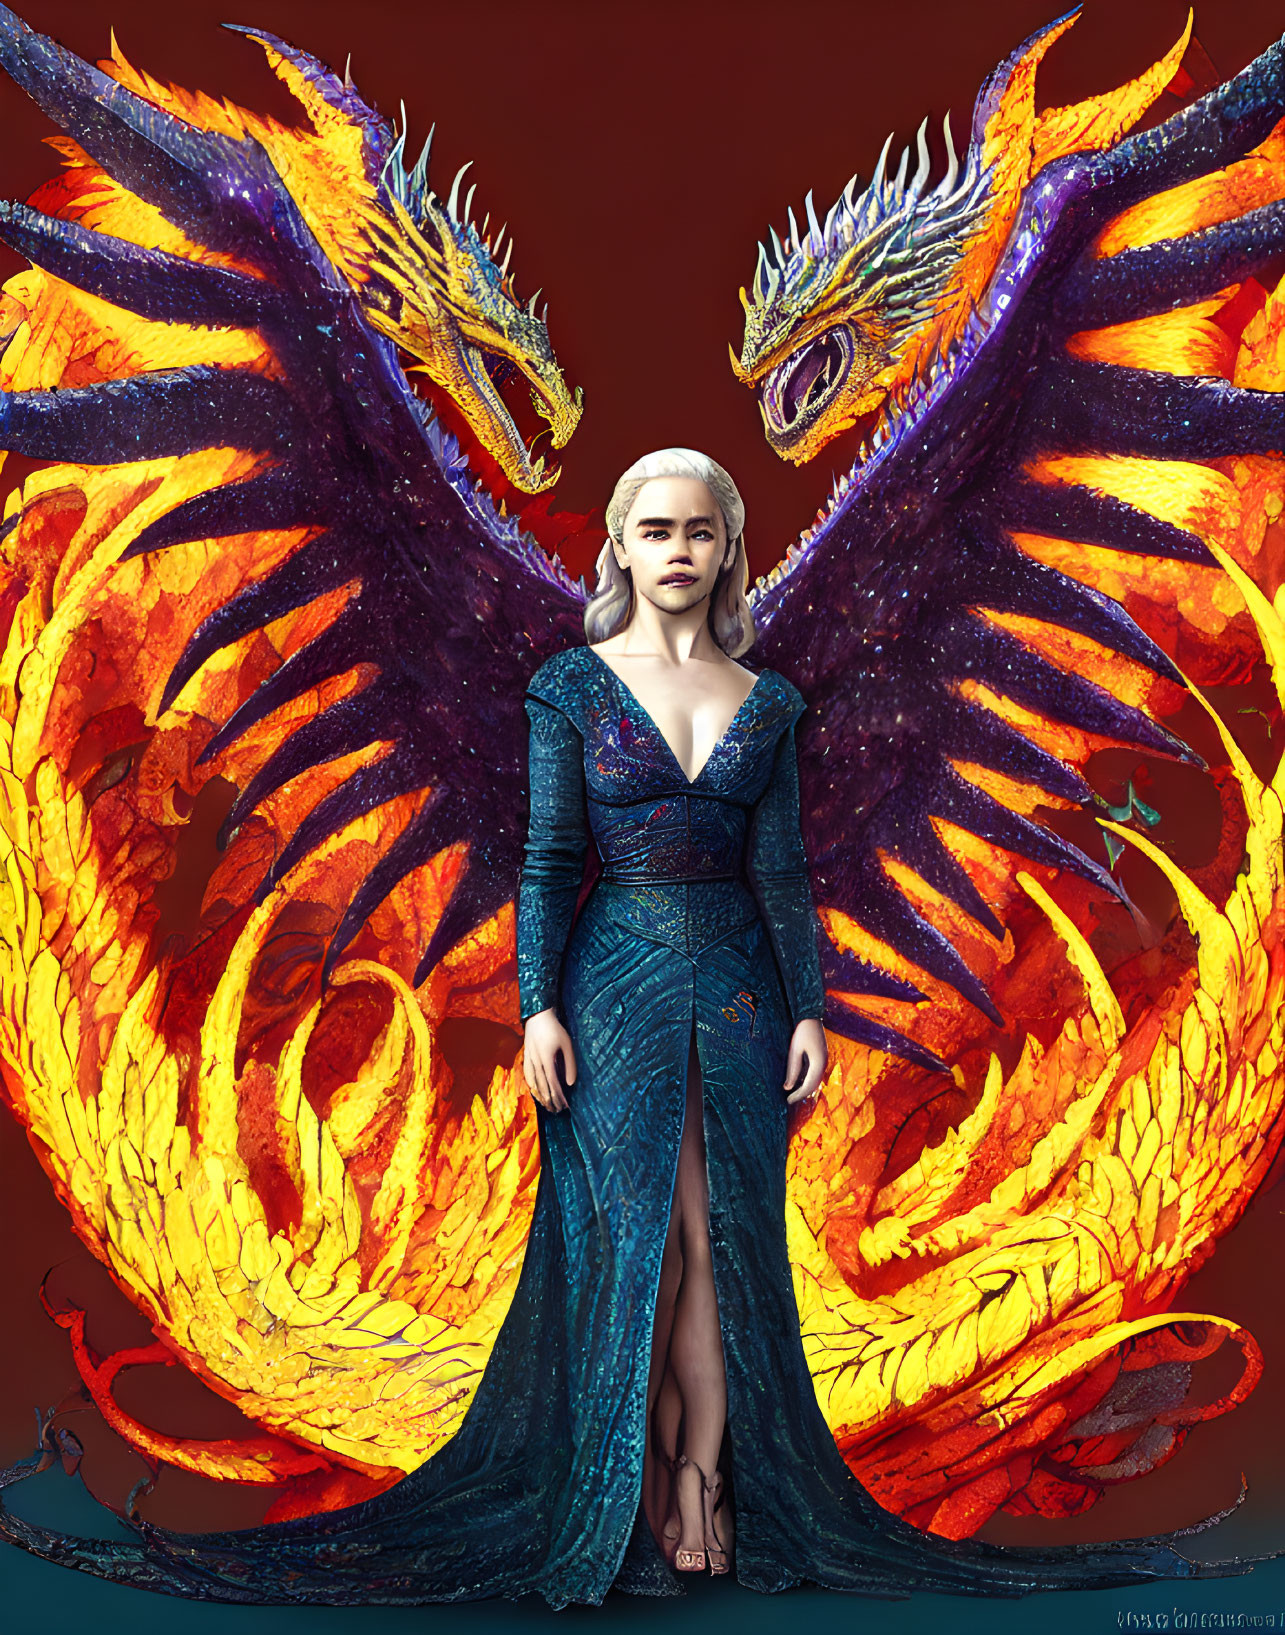 Blonde woman in blue dress faces fiery-winged dragon with matching eyes